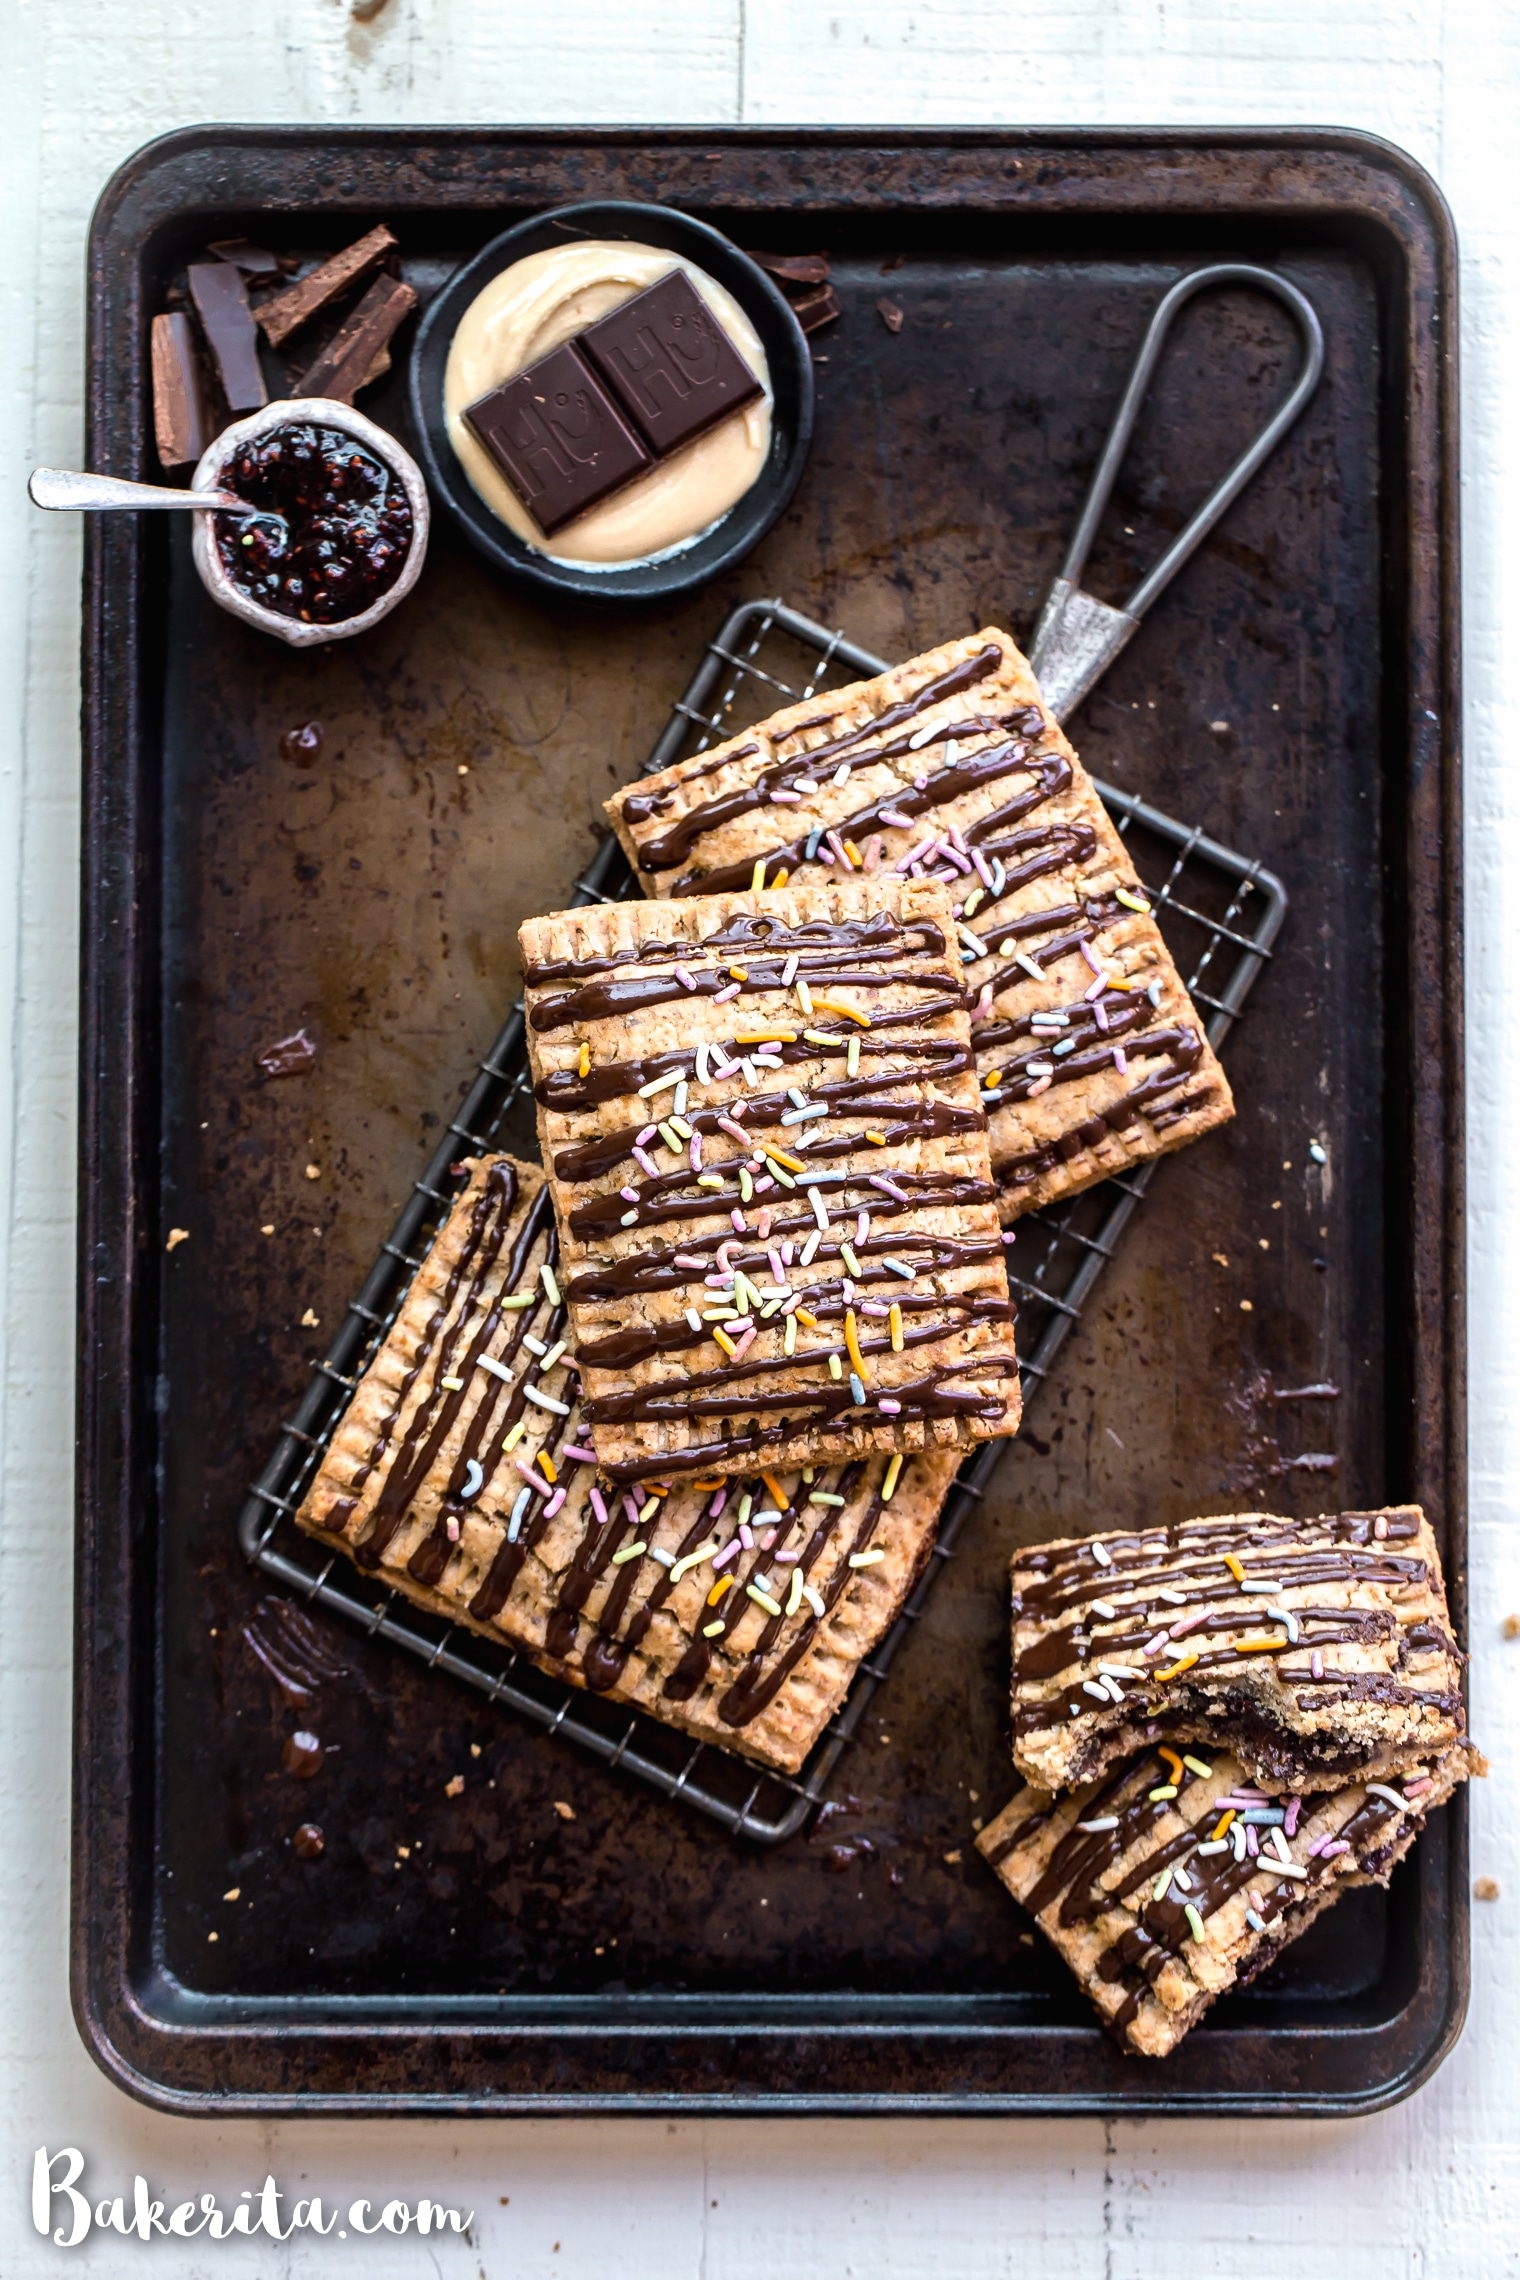 These Chocolate Cashew Butter & Jelly Pop Tarts are made with a flaky vegan and paleo crust and stuffed with cashew butter, raspberry jelly, and chopped Hu Kitchen chocolate. You’re going to go nuts for these paleo & vegan copycat of your favorite childhood treat!